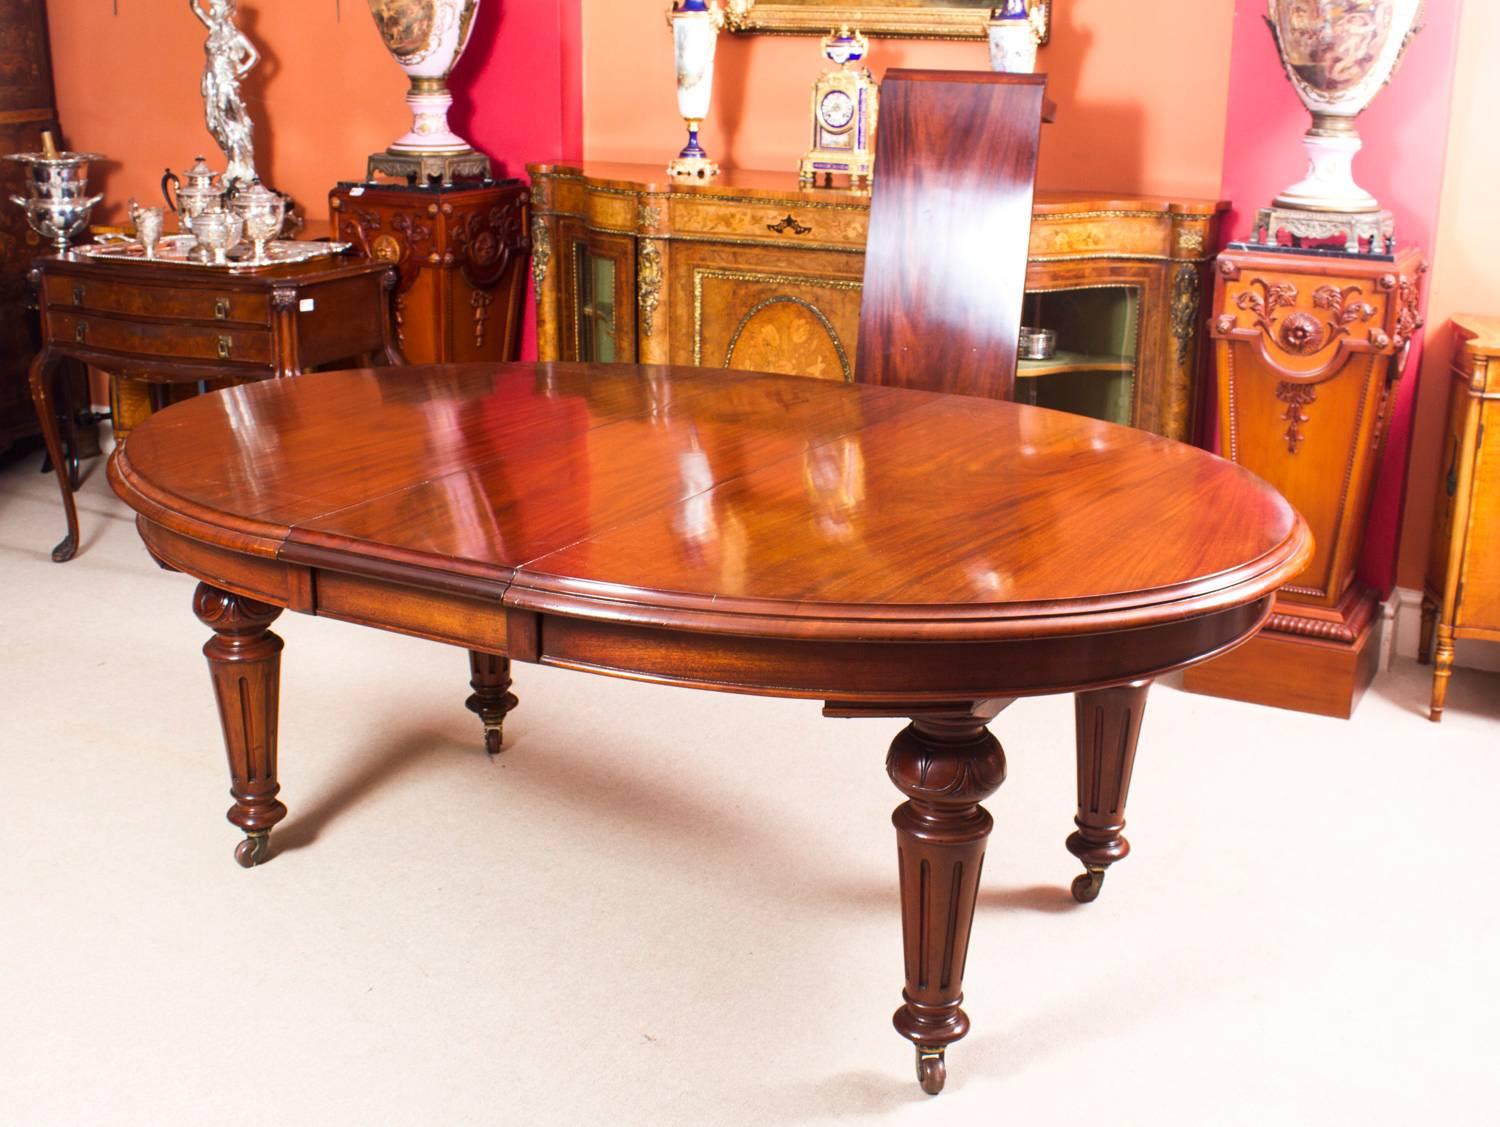 English Antique Victorian Oval Dining Table and Eight Chairs, circa 1860